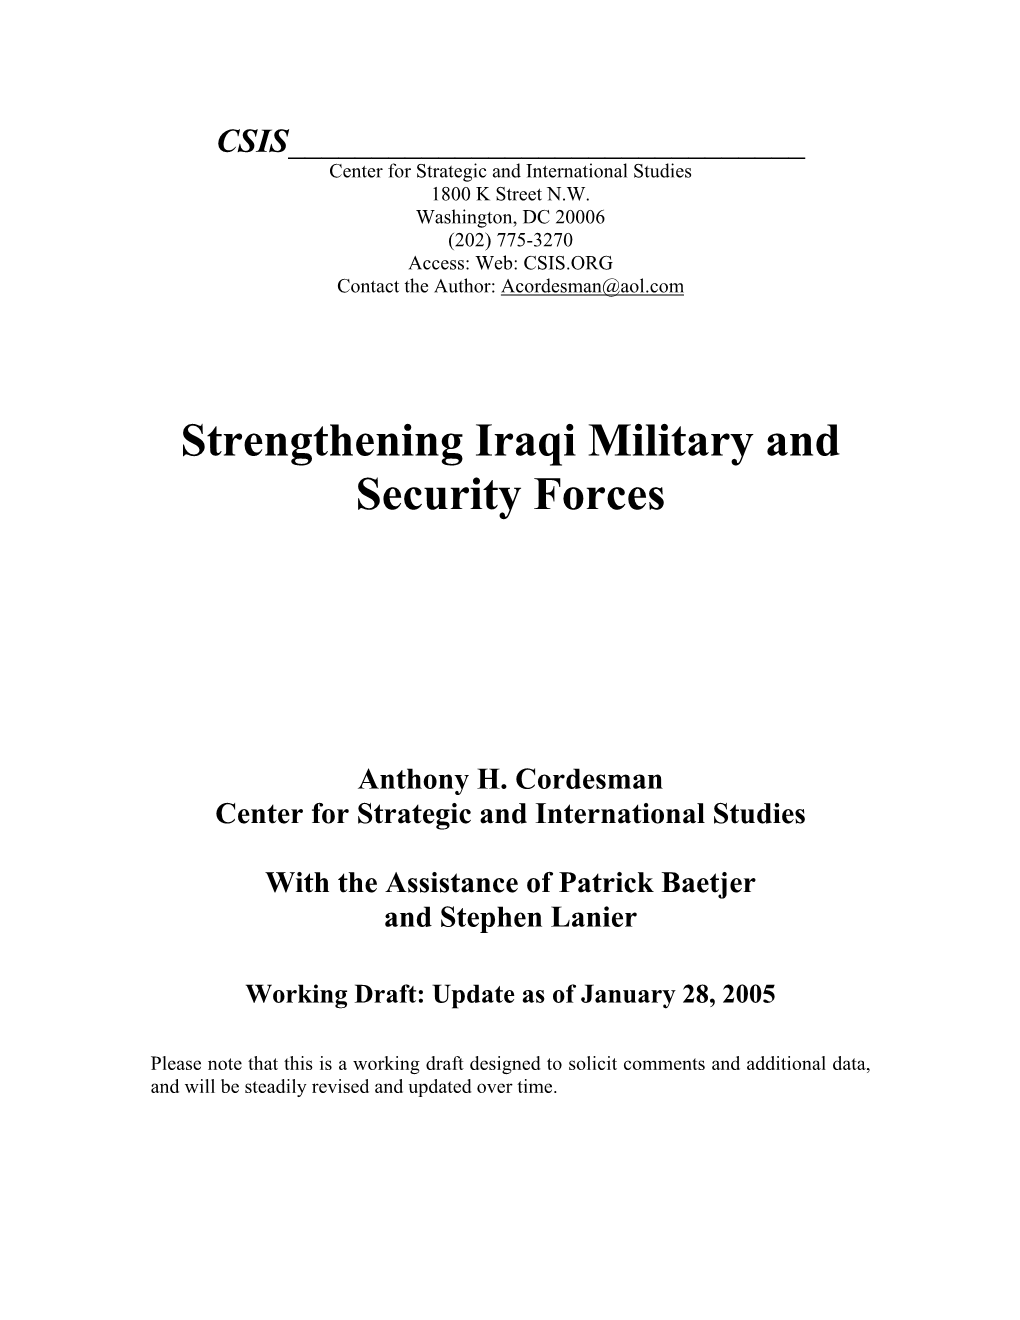 Strengthening Iraqi Military and Security Forces and Giving Them Their Proper Role in Security and Counterinsurgency Missions